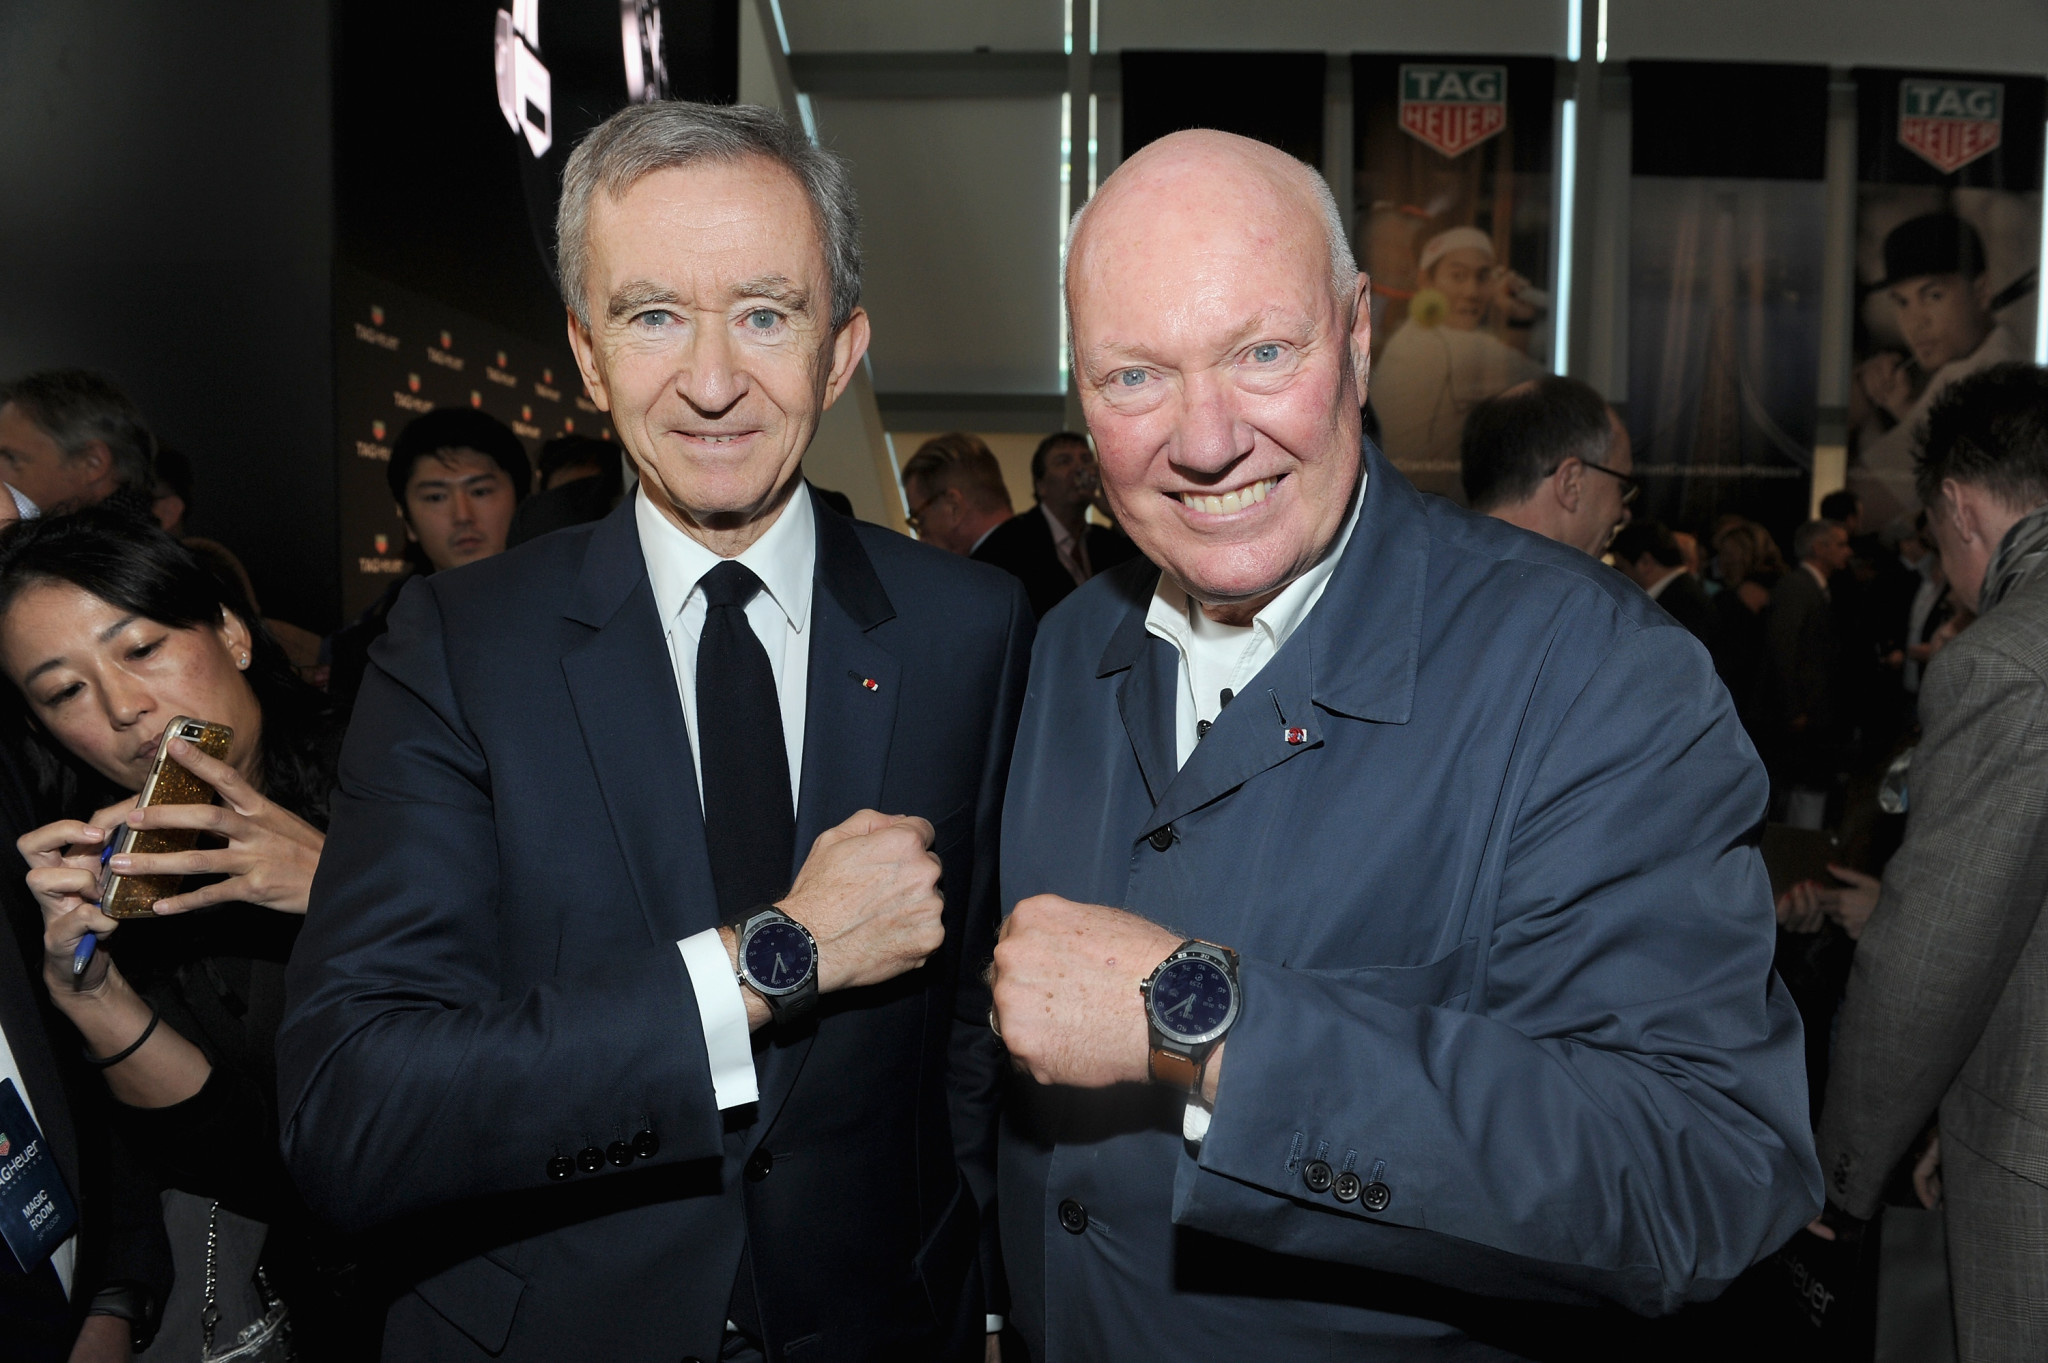 jean claude biver watch collection